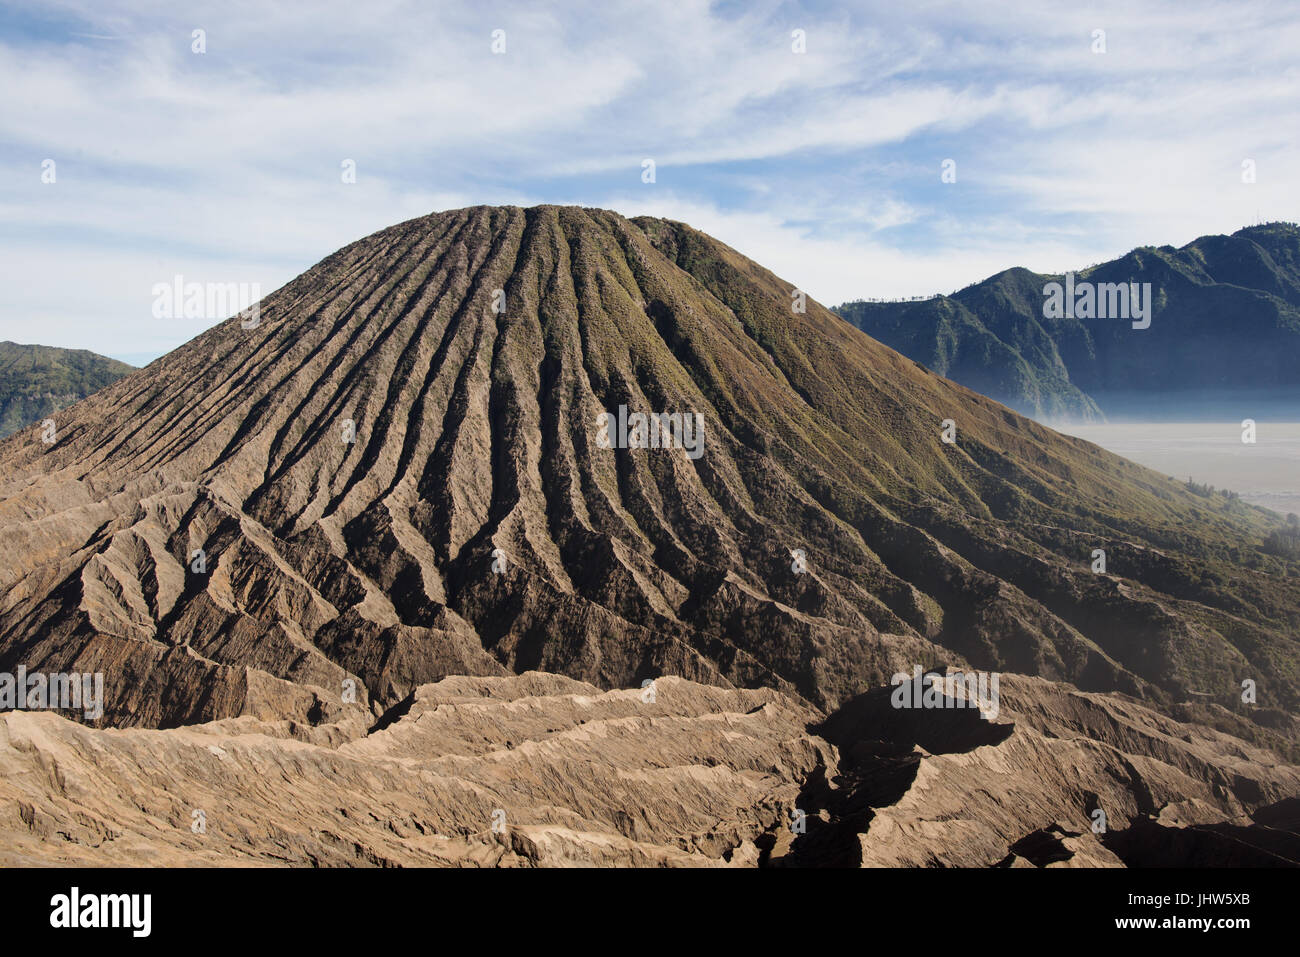 Volcanic cone within the caldeira of Mount Bromo active volcano, East Java INdonesia. Stock Photo